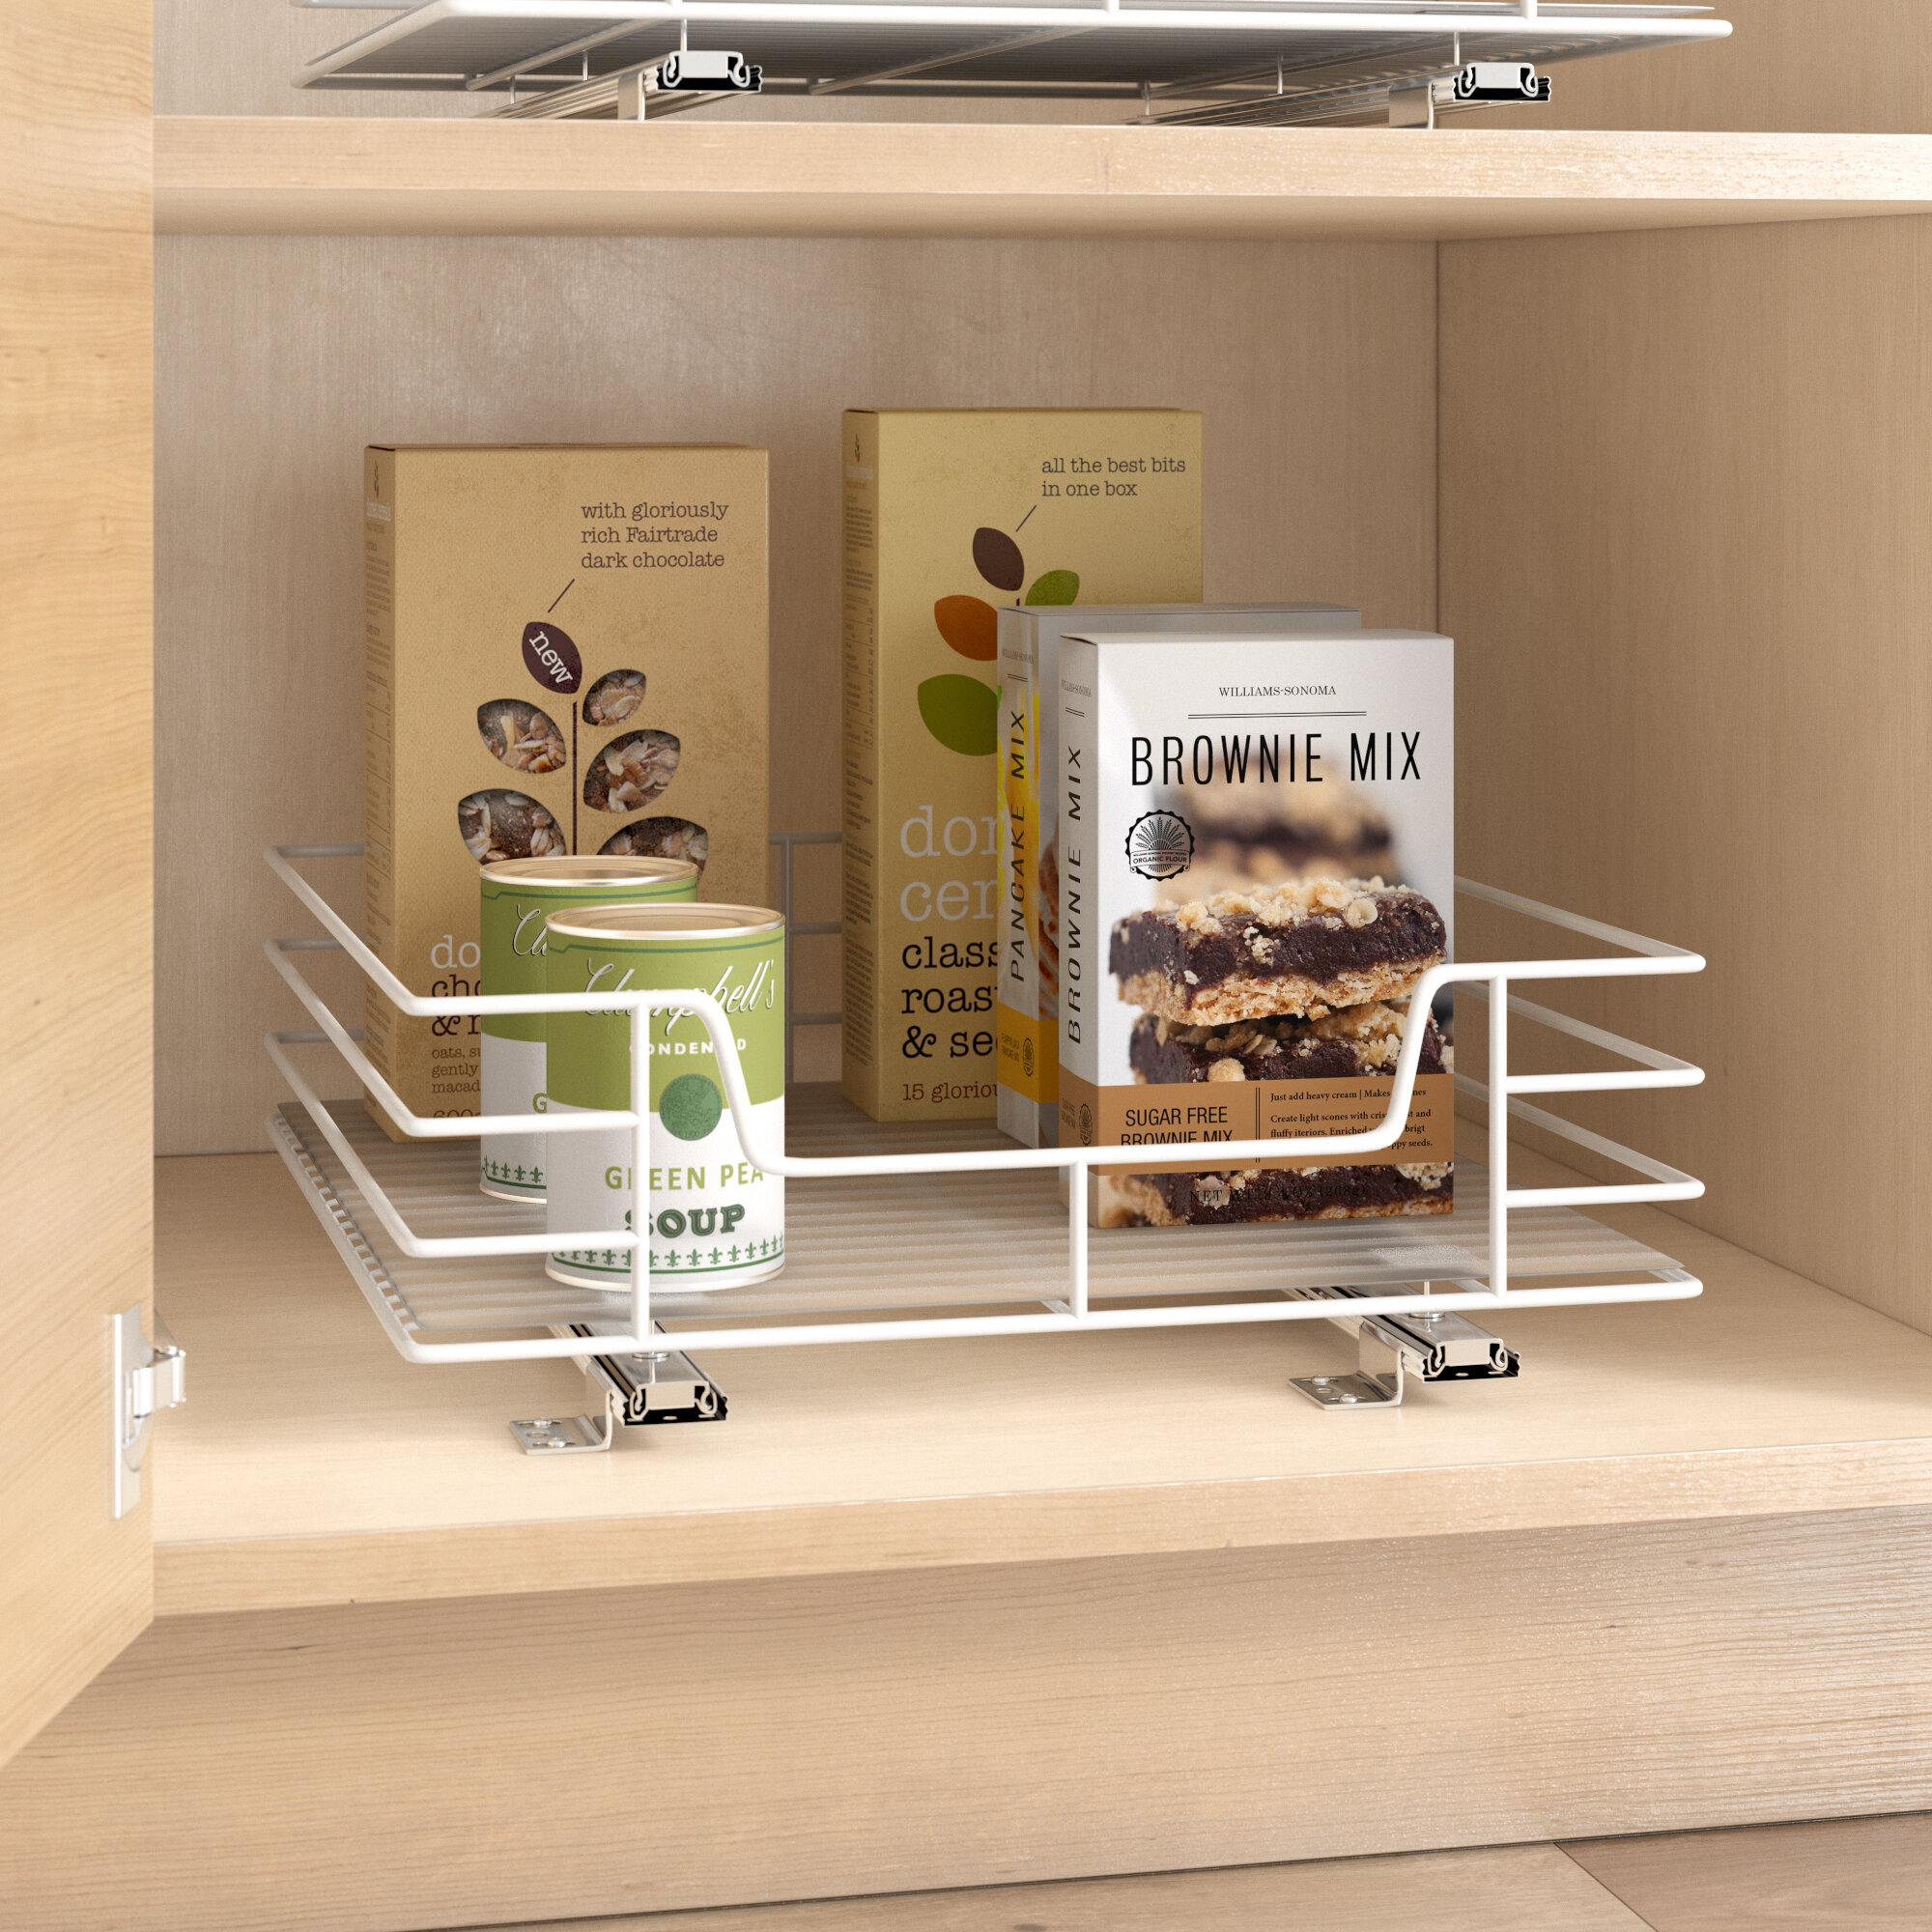 Rebrilliant Pull Out Drawer & Reviews